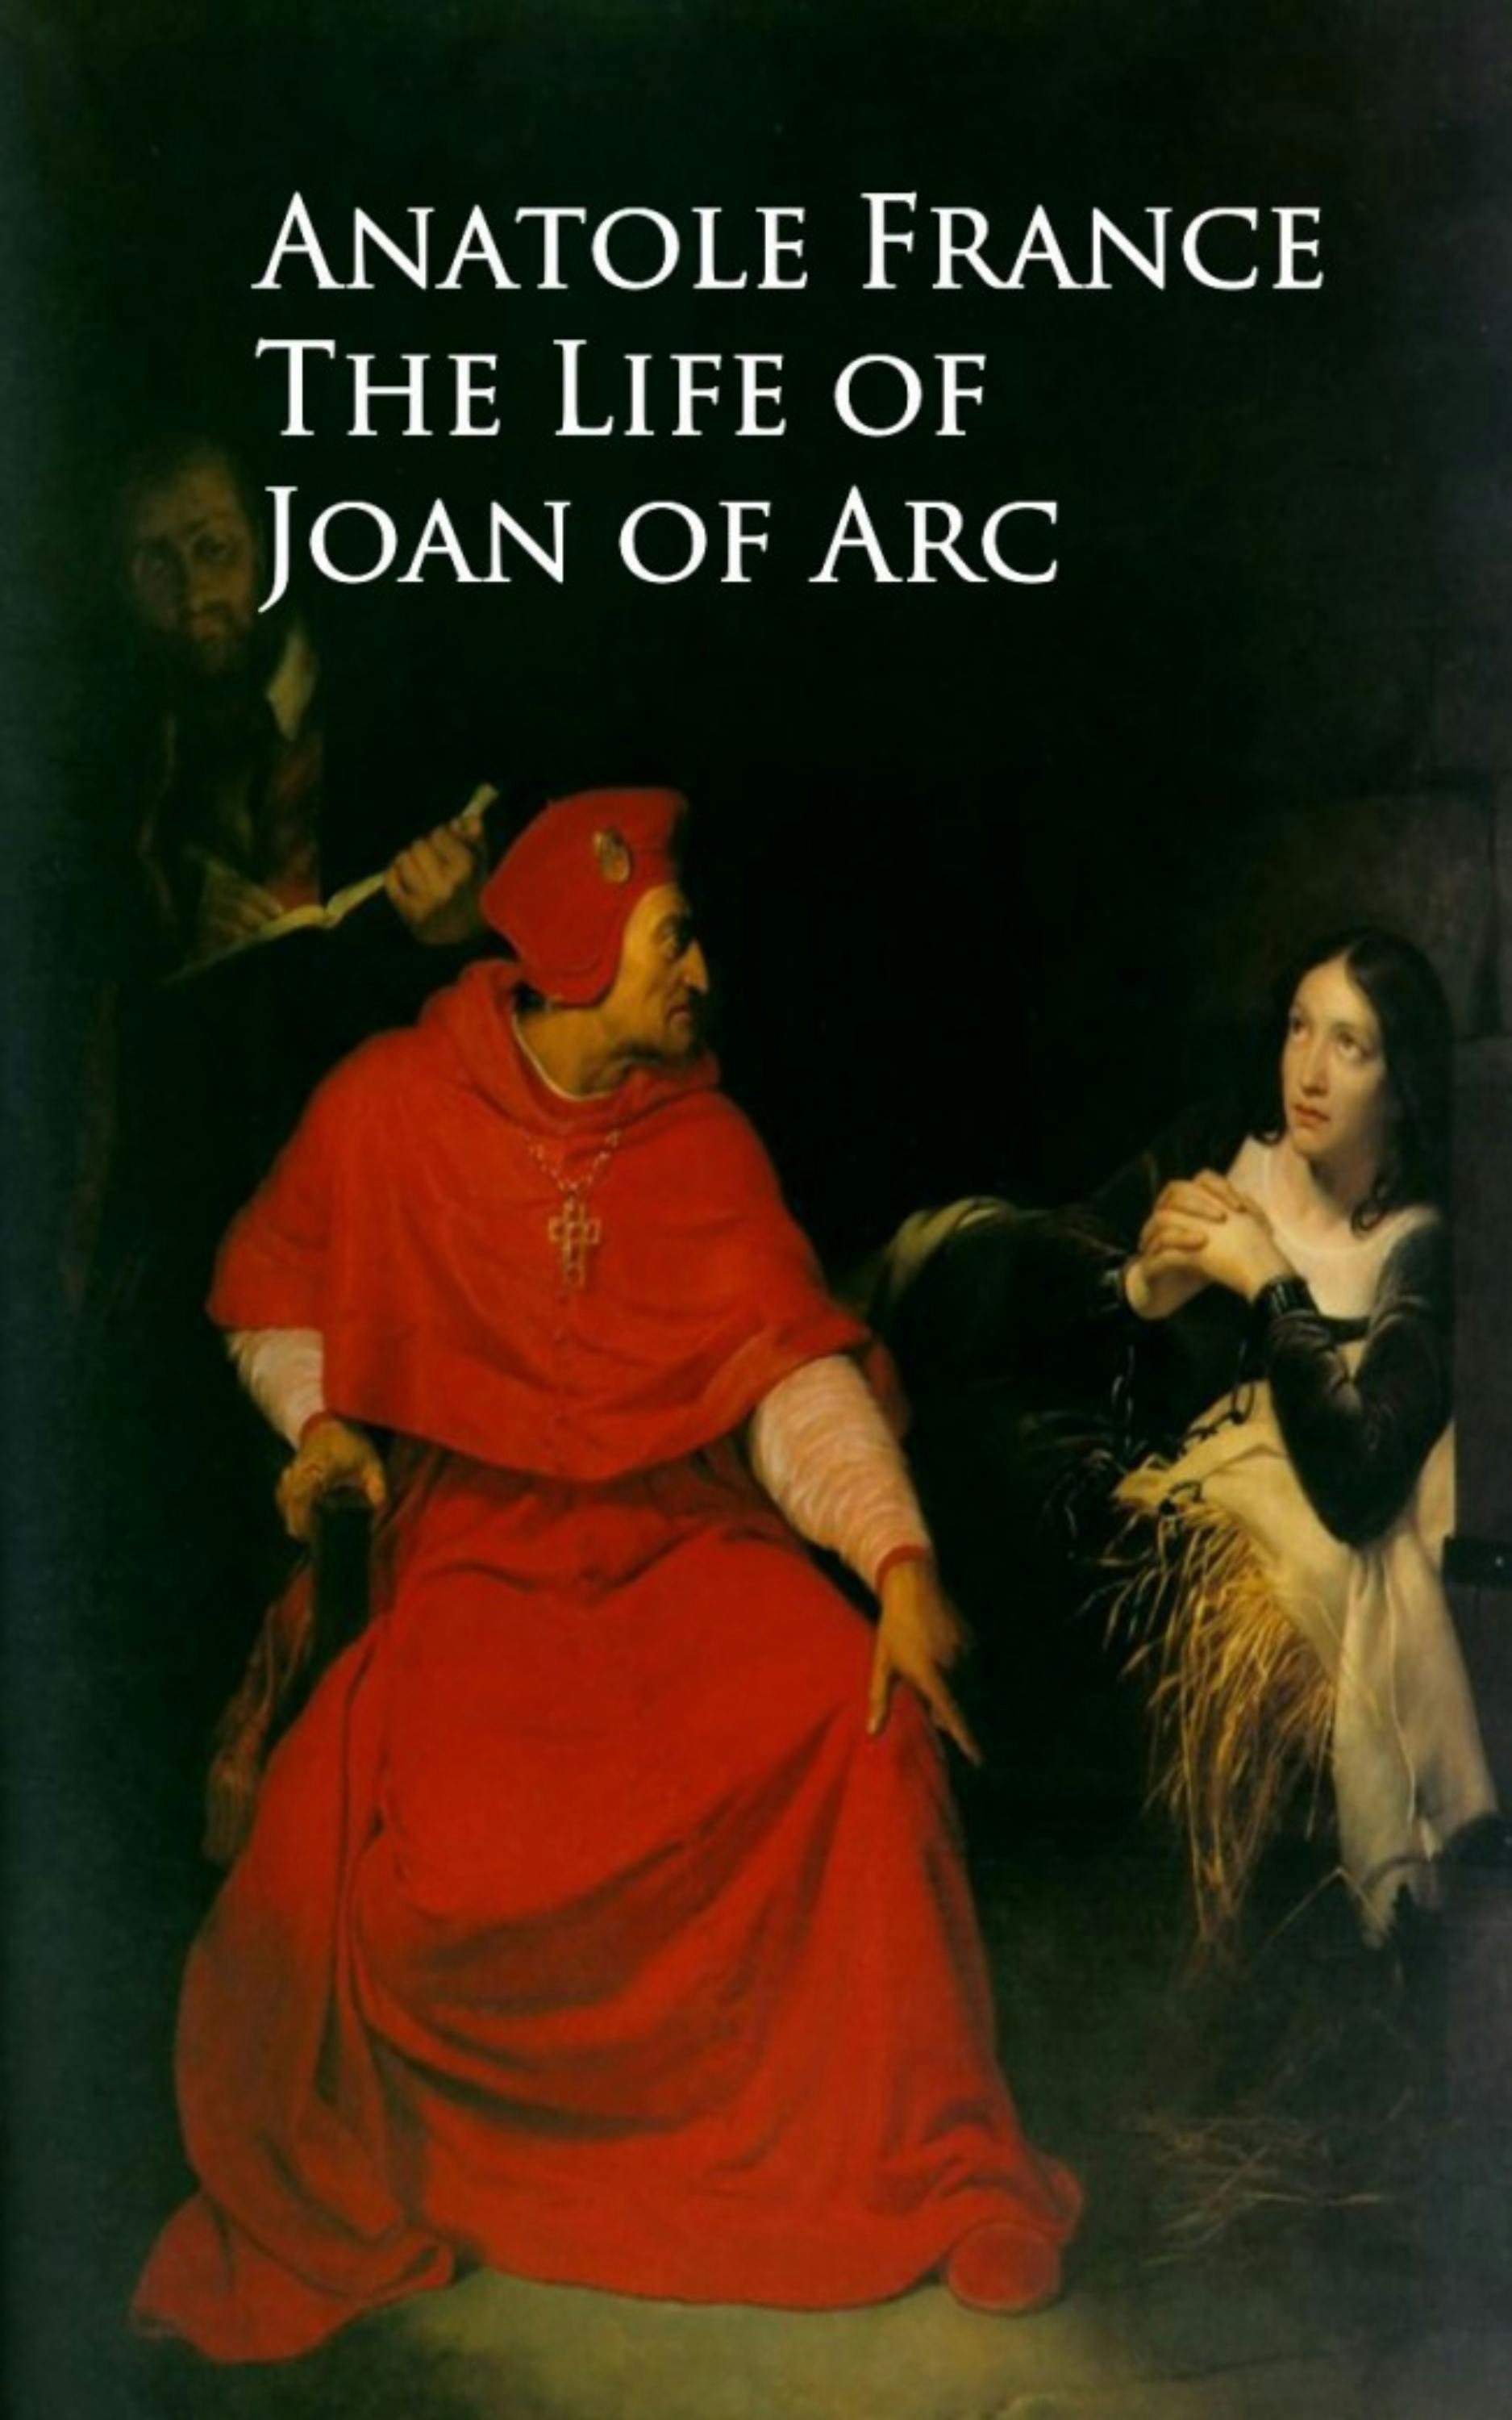 The Life of Joan of Arc - Anatole France